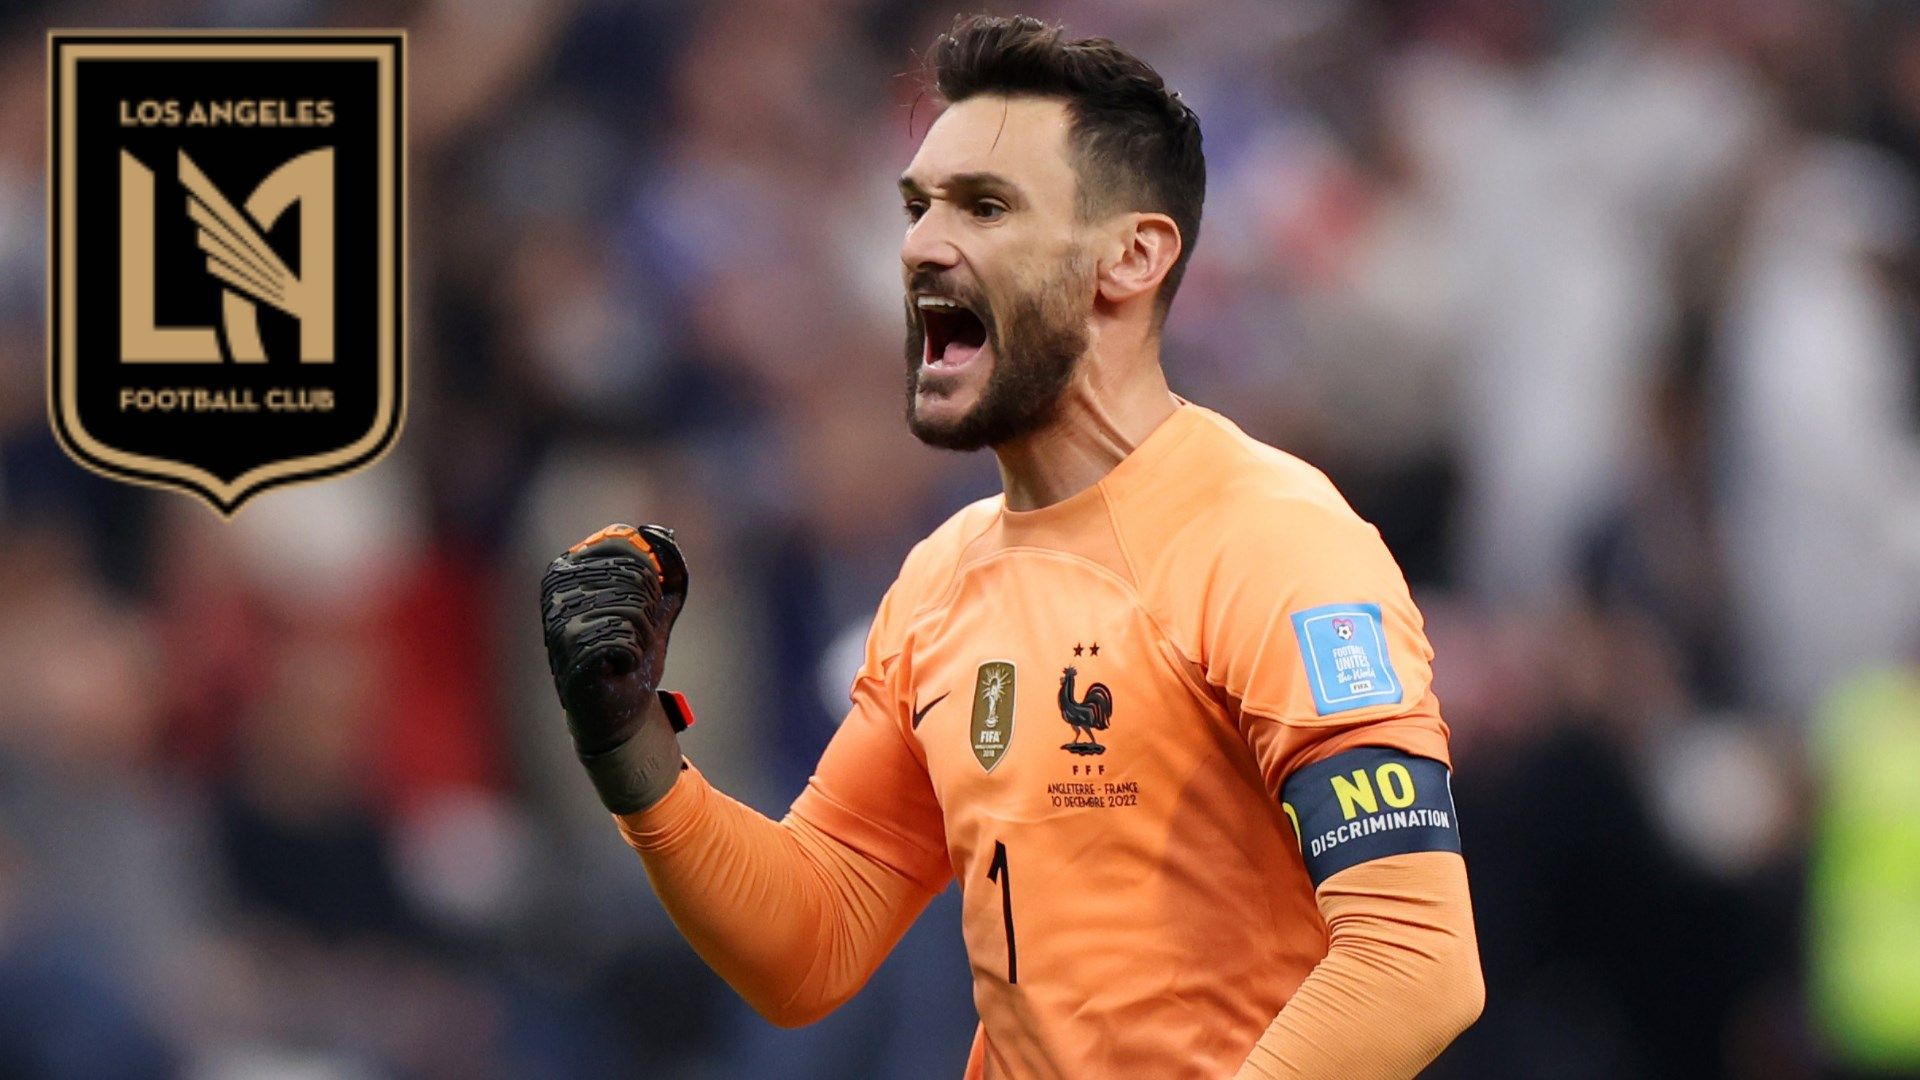 France No1 Lloris Red Goalkeeper Kid Soccer Country Jersey